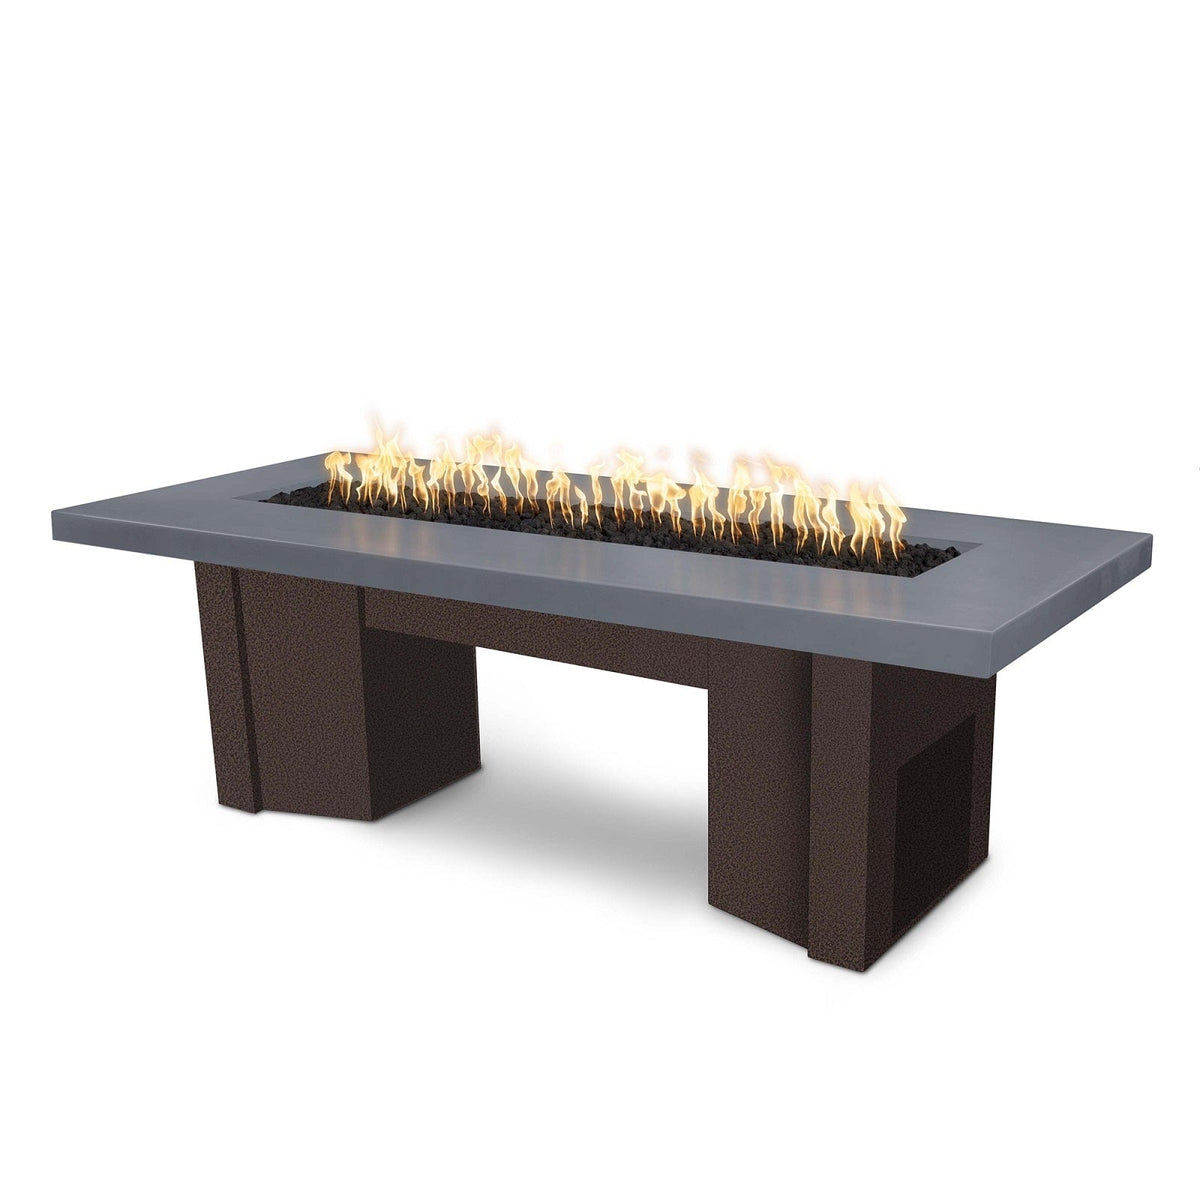 The Outdoor Plus Fire Features Gray (-GRY) / Copper Vein Powder Coated Steel (-CPV) The Outdoor Plus 60&quot; Alameda Fire Table Smooth Concrete in Liquid Propane - Match Lit with Flame Sense System / OPT-ALMGFRC60FSML-LP